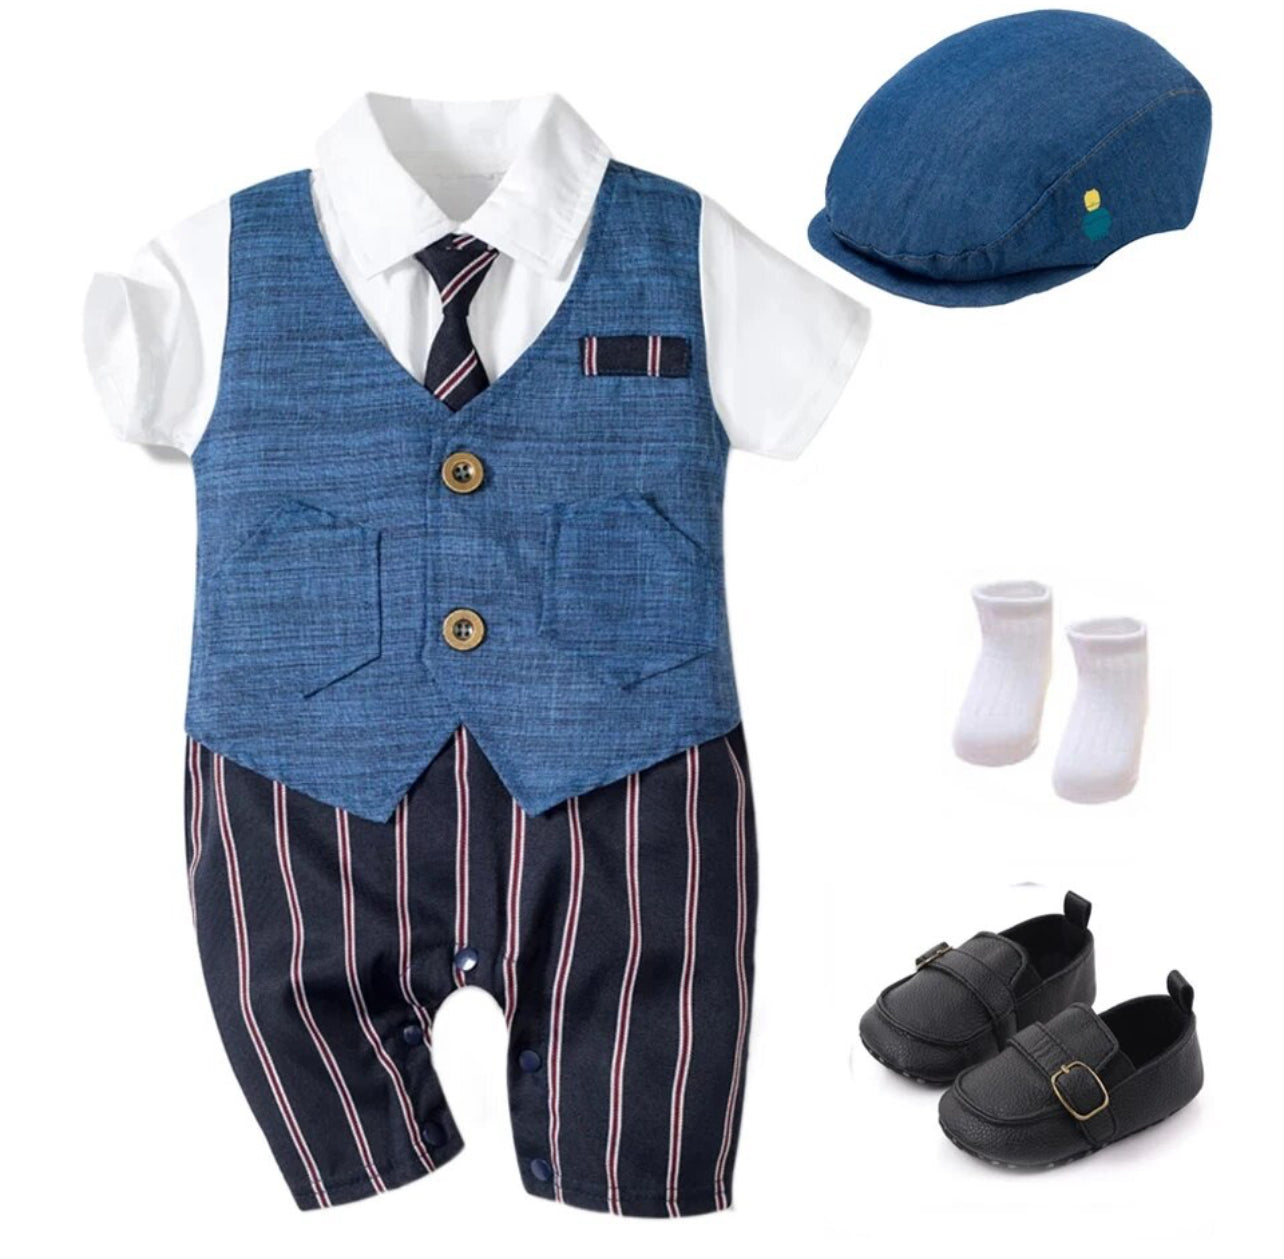 Baby Romper Boys Formal Hat + Jumpsuit + Shoes + Socks, 4 Pieces Outfit